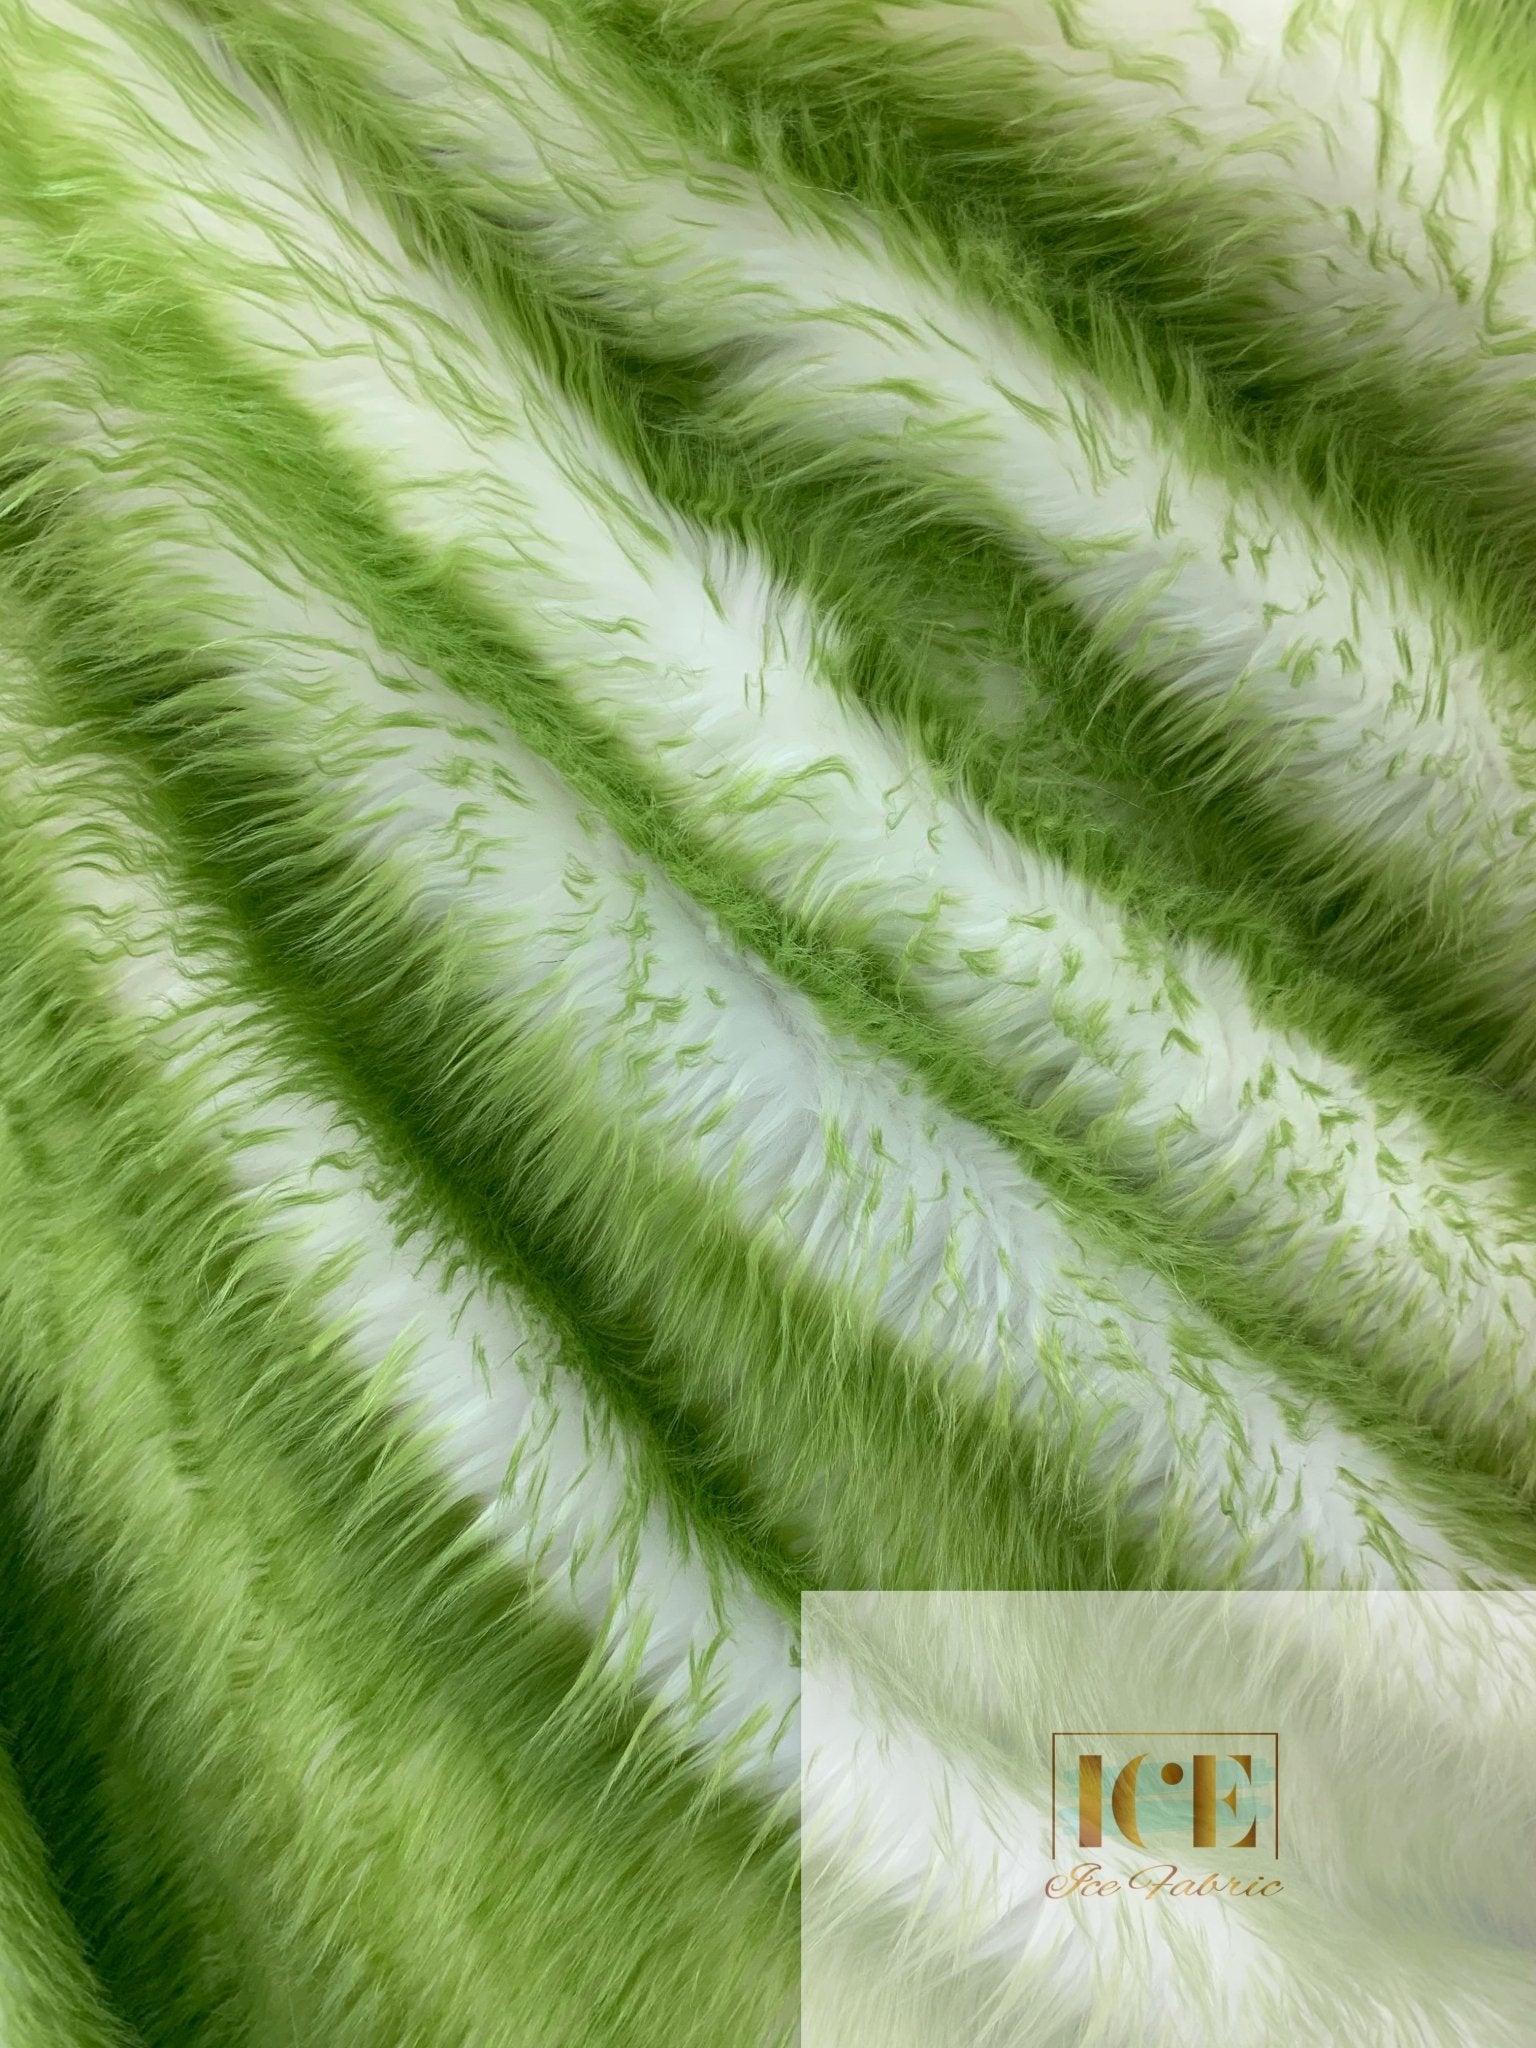 Canadian Fox 2 Tone Shaggy Long Pile Faux Fur Fabric For Blankets, Costumes, Bed SpreadICEFABRICICE FABRICSLimeBy The Yard (60 inches Wide)Canadian Fox 2 Tone Shaggy Long Pile Faux Fur Fabric For Blankets, Costumes, Bed Spread ICEFABRIC Lime